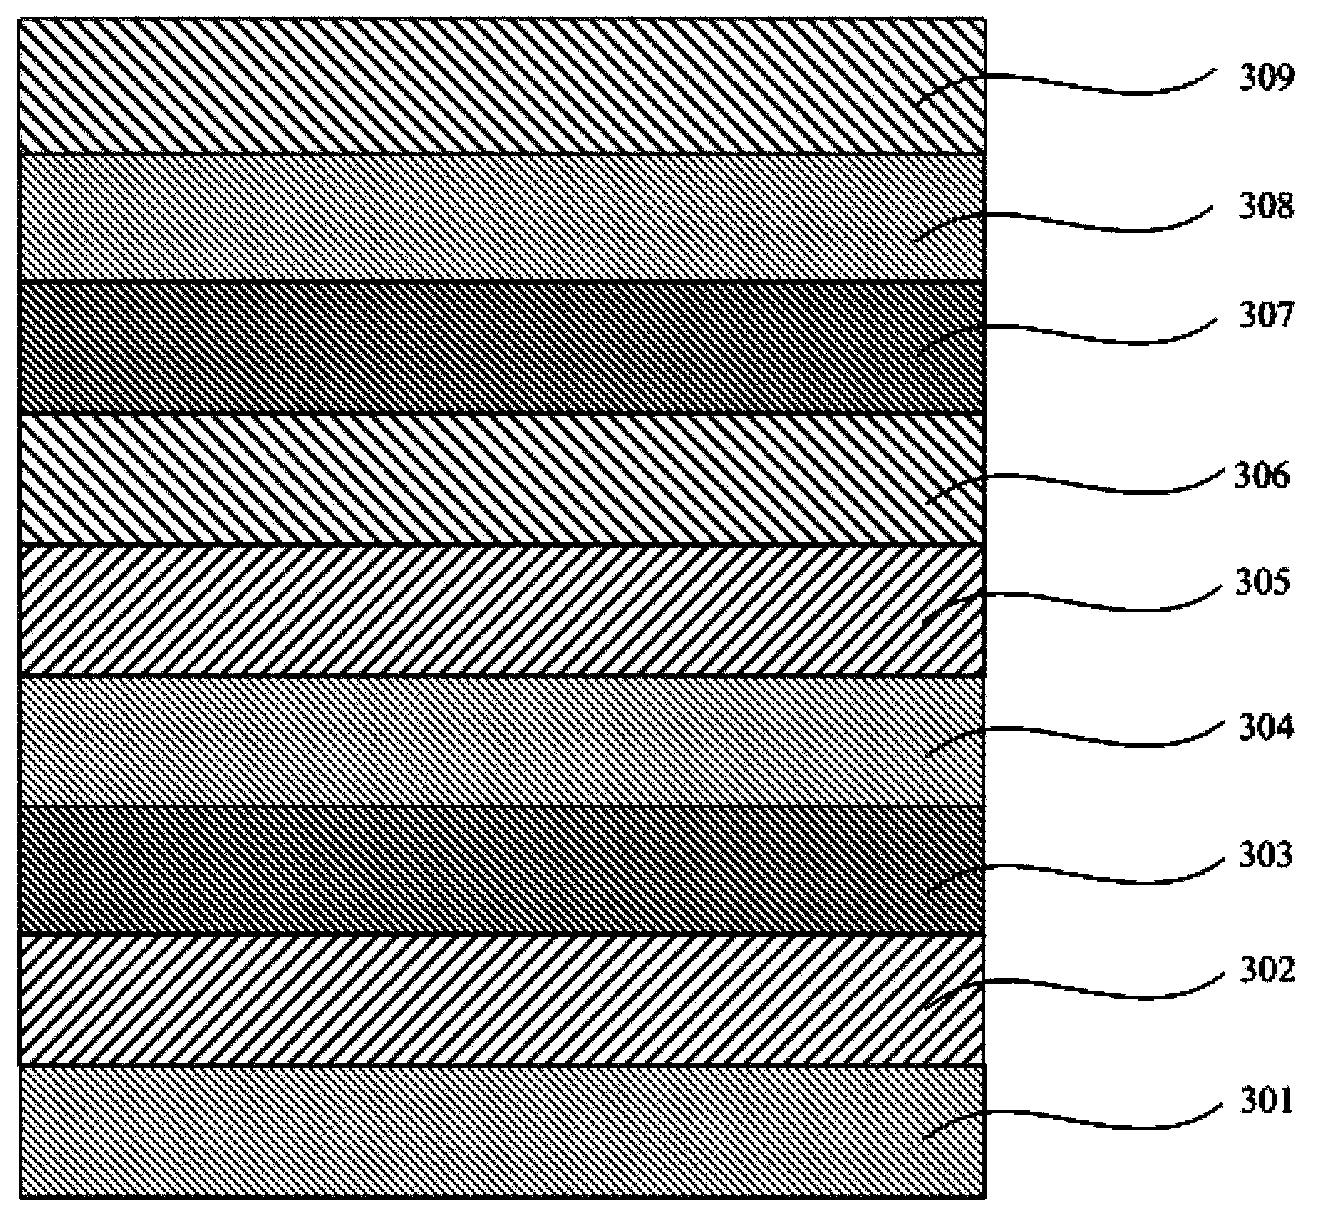 Organic electrophosphorescent materials, preparing method thereof and organic electroluminescence devices